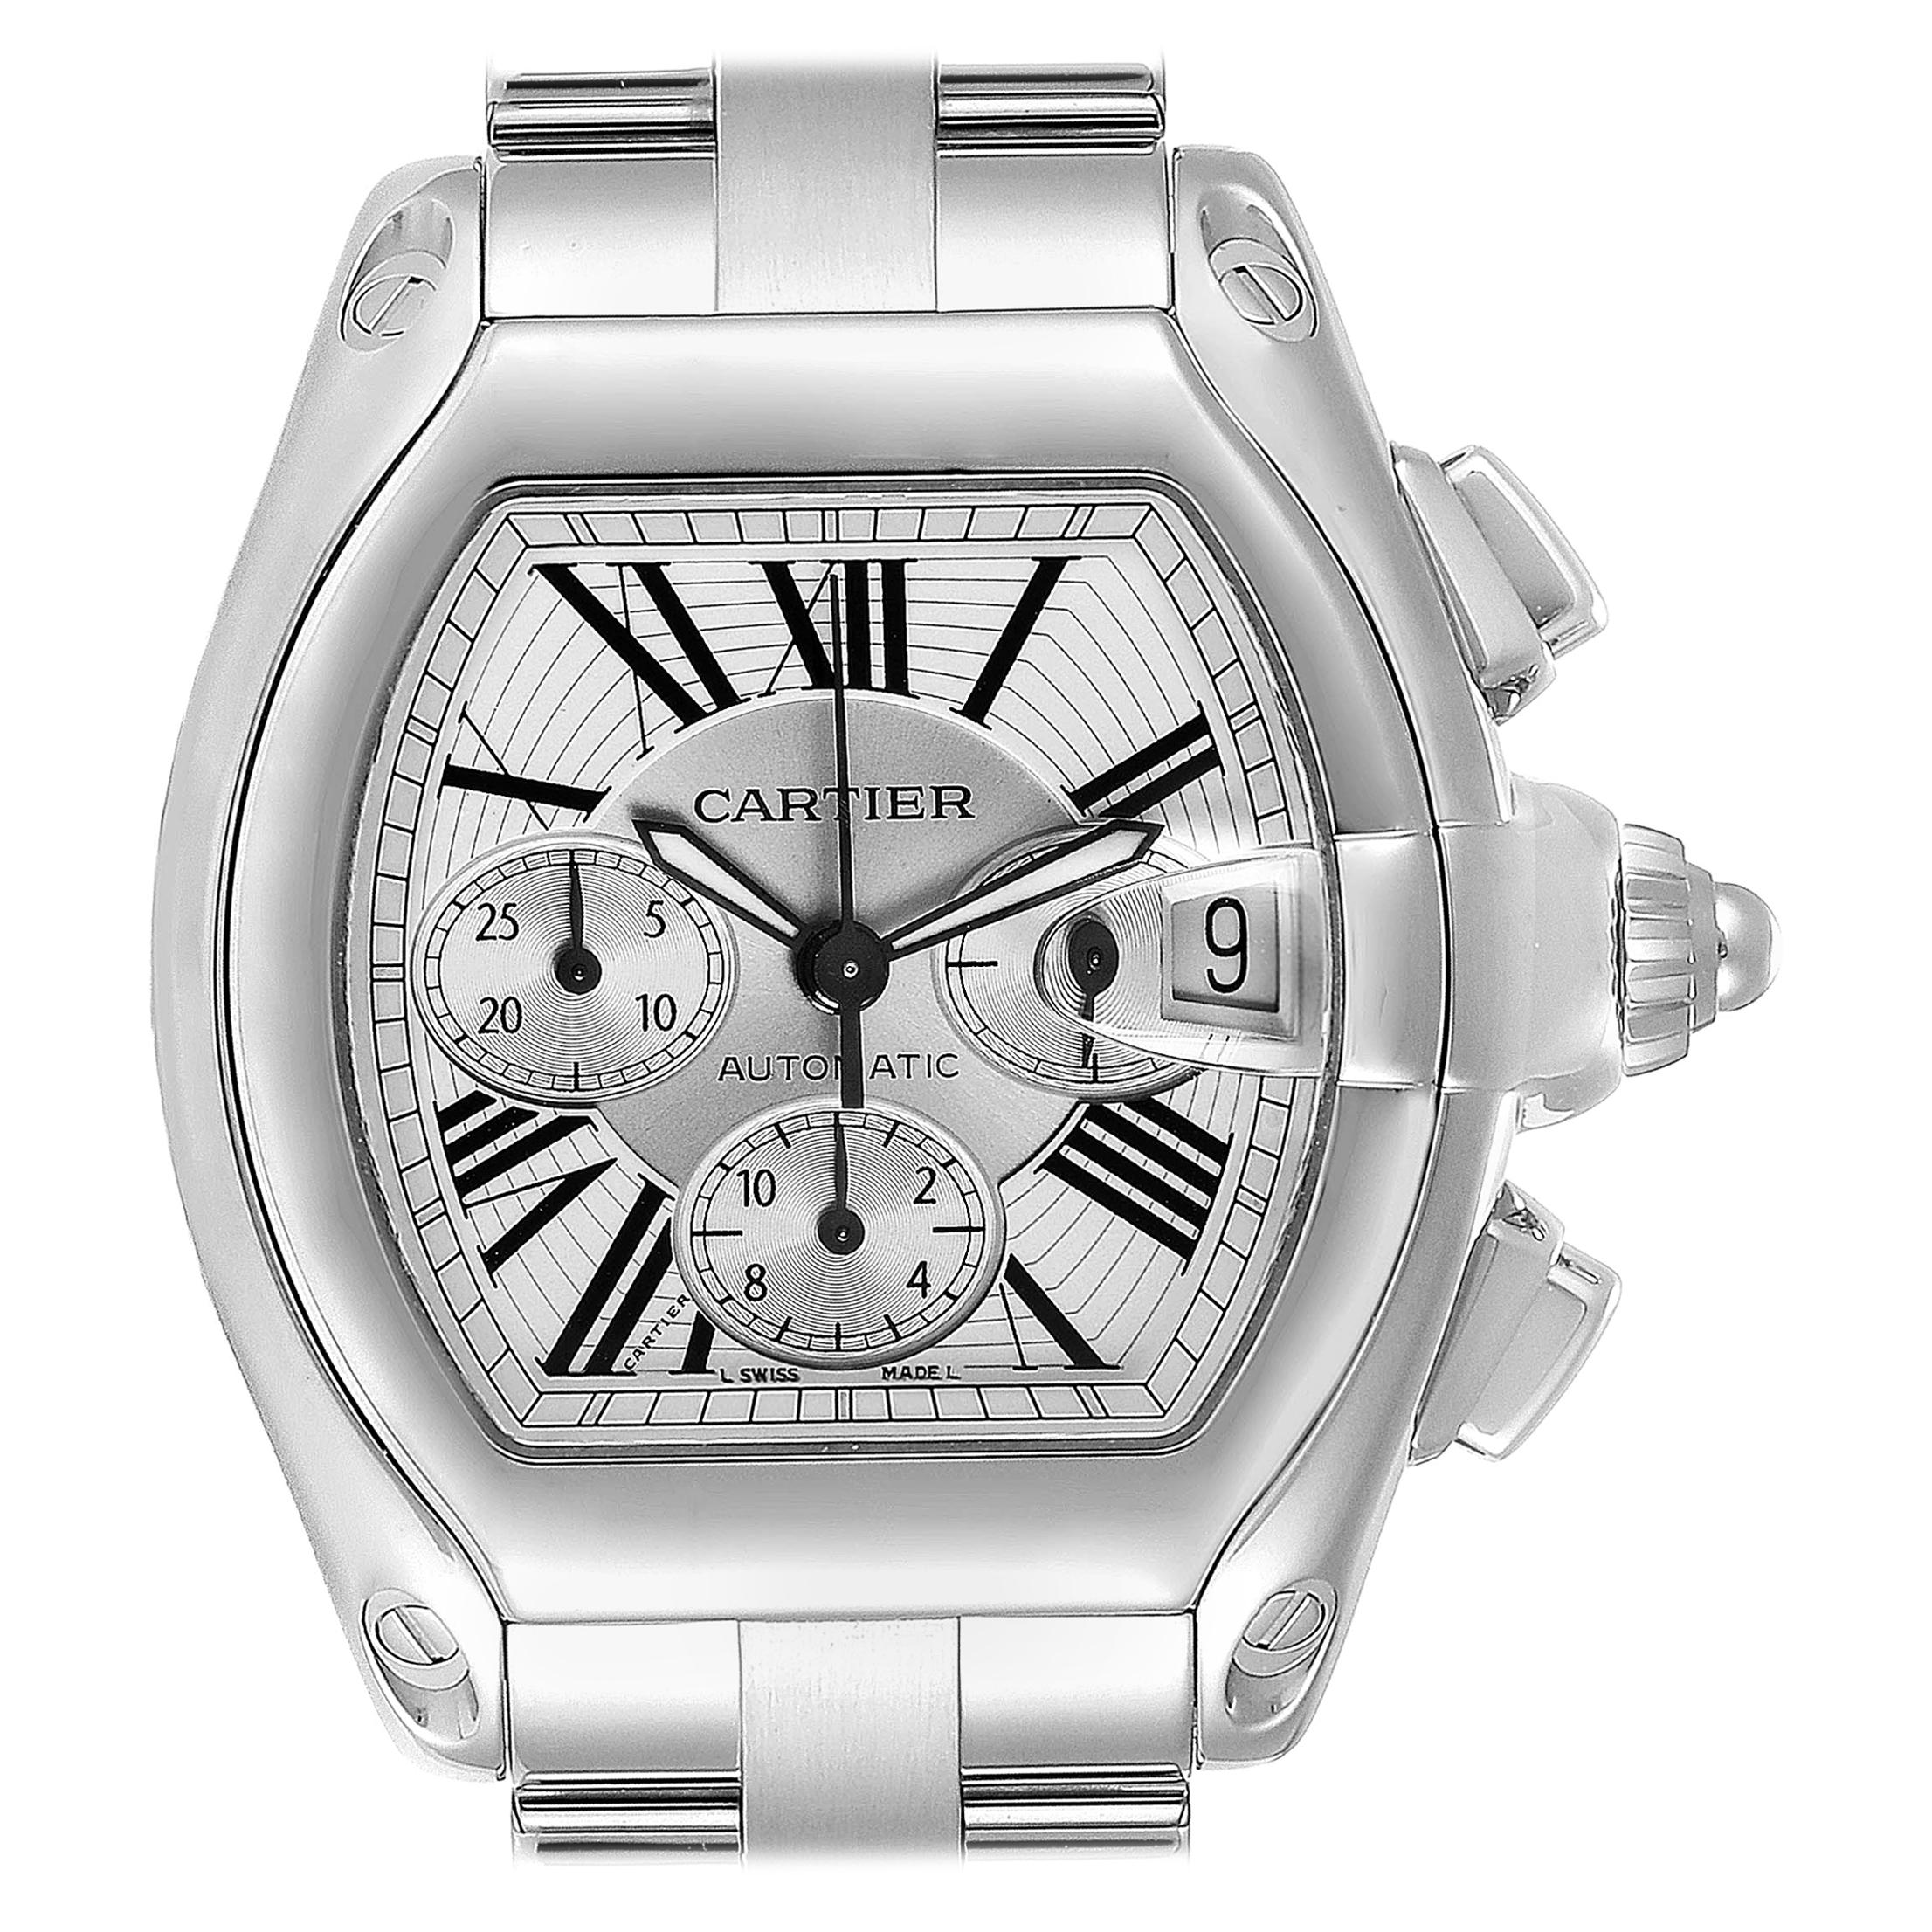 Cartier Roadster XL Chronograph Automatic Men's Watch W62019X6 Box For Sale